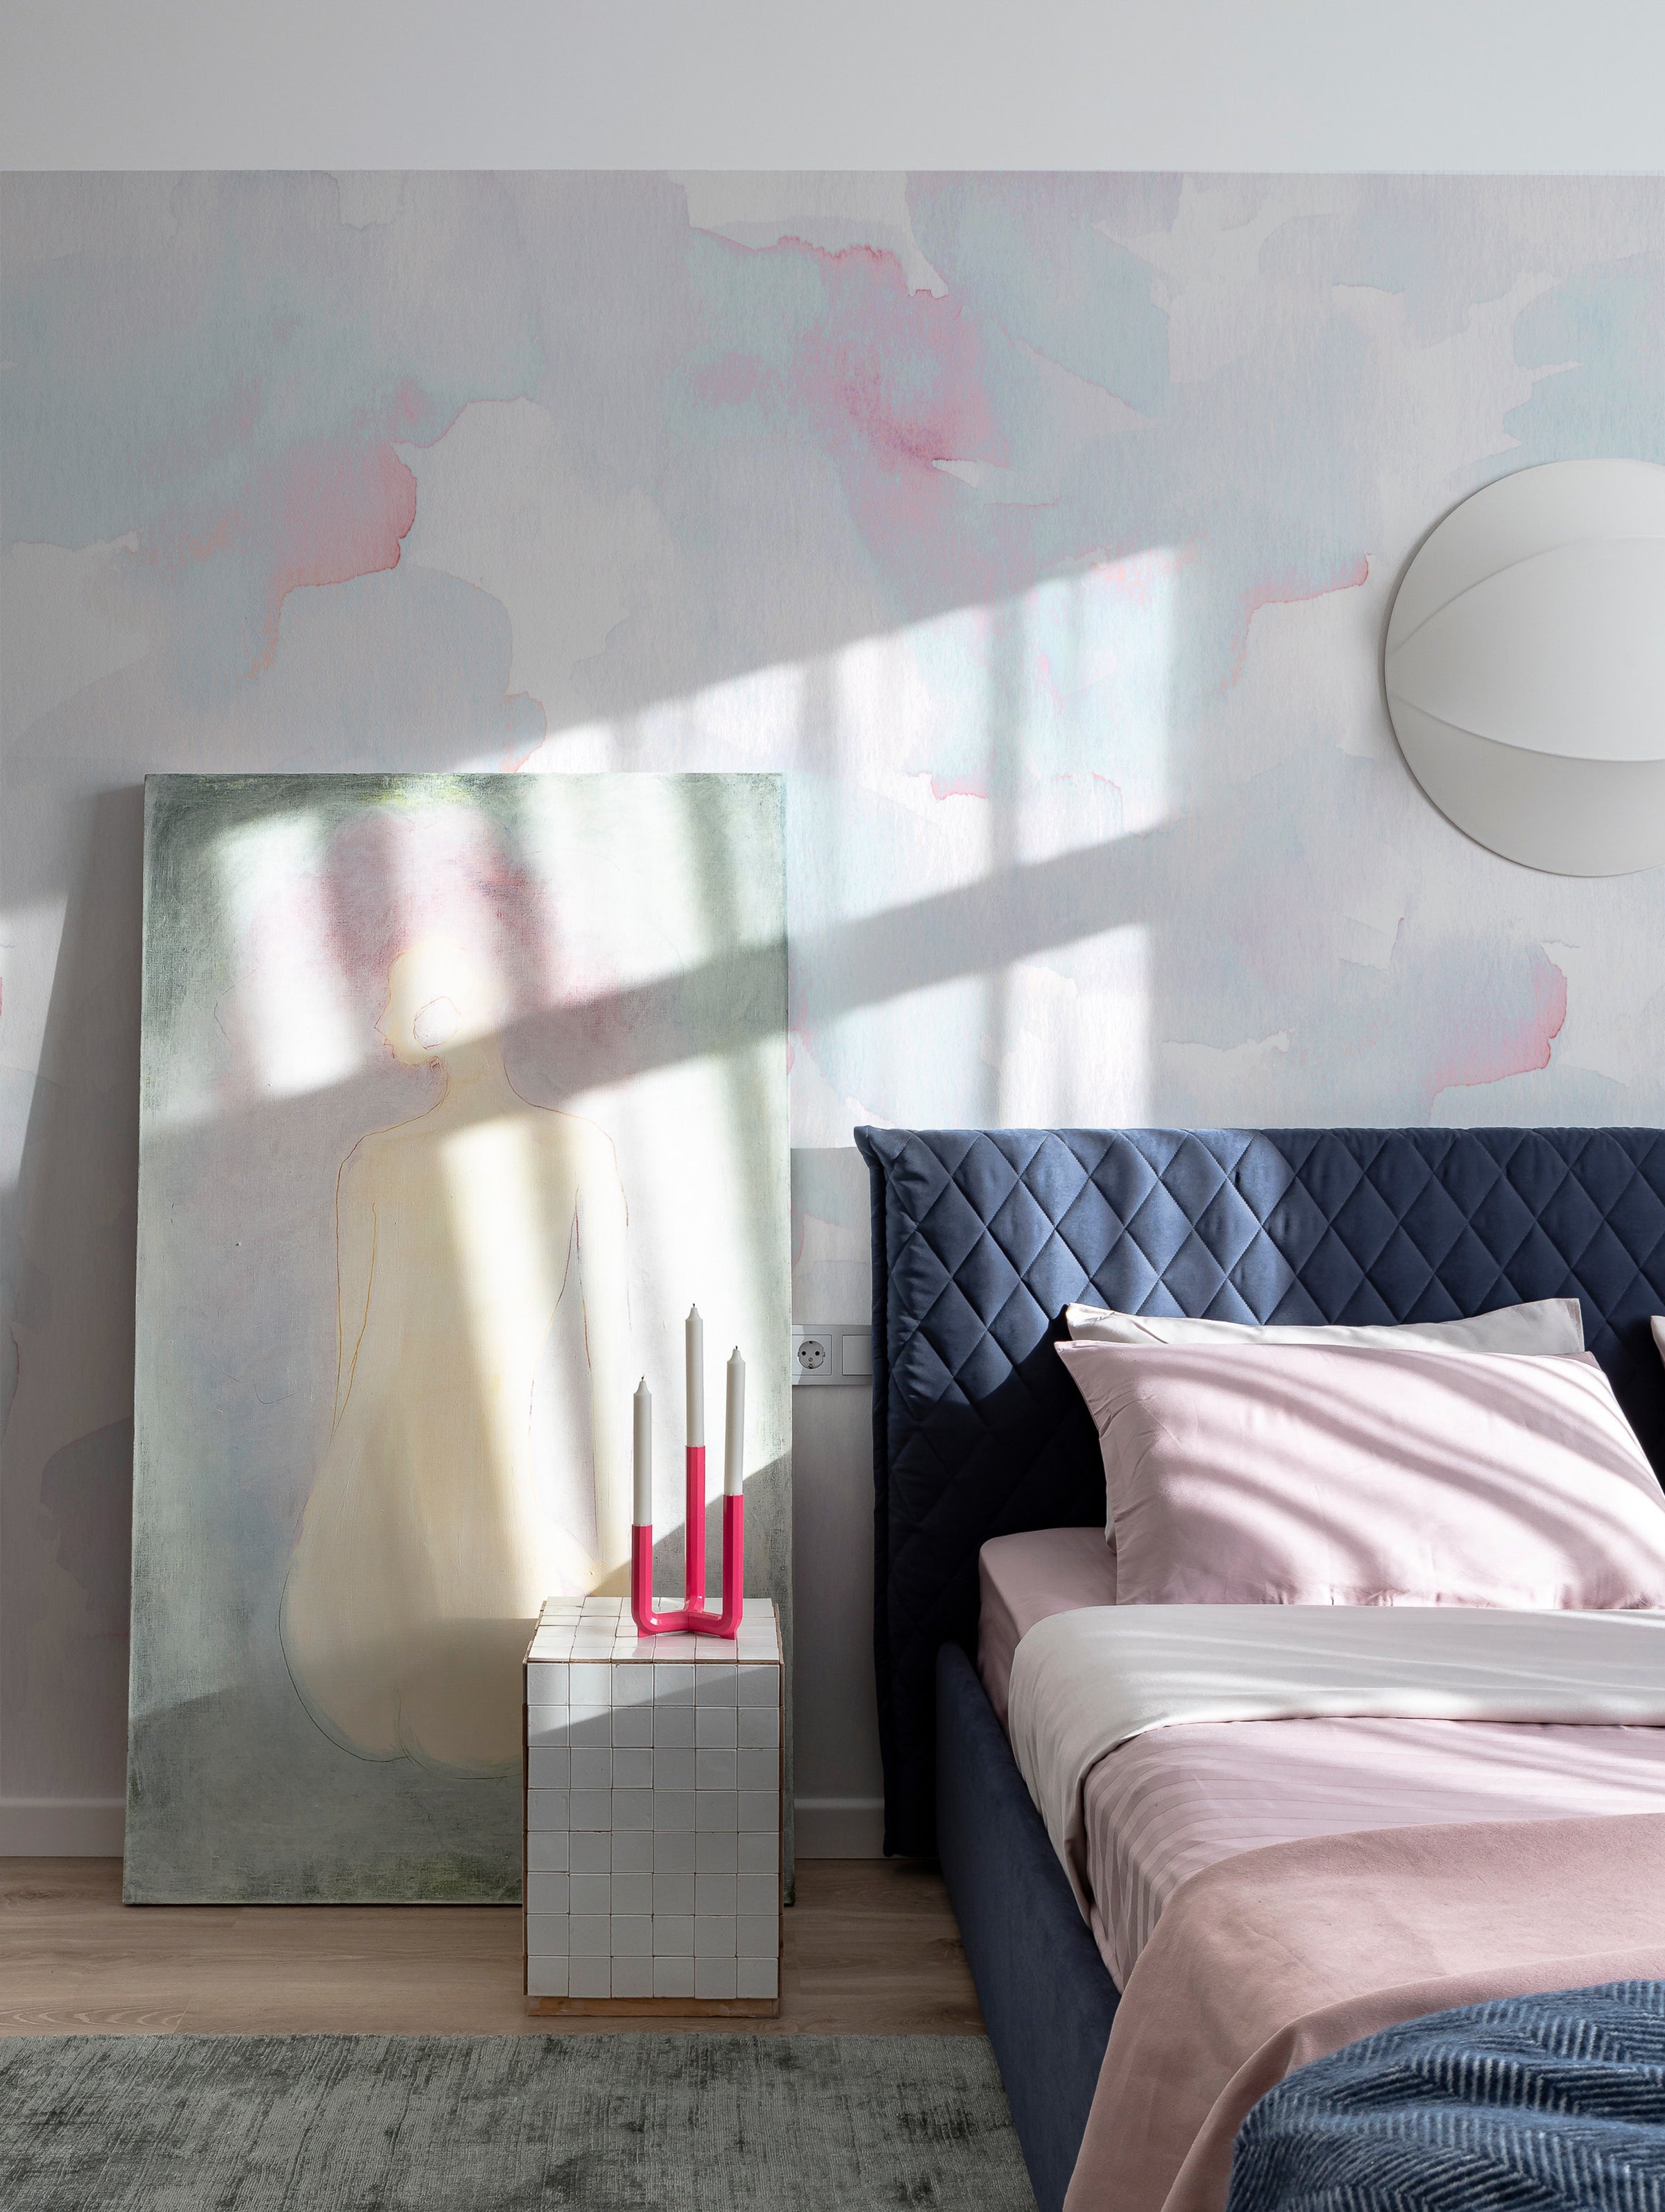 Modern bedroom with the Hand Painted Mural - Cotton Candy as a focal wall, displaying ethereal watercolor patches in pink and blue. The room is styled with a navy upholstered bed, pink bedding, and a contemporary mirrored side table with pink candles, offering a chic and serene sleeping space.